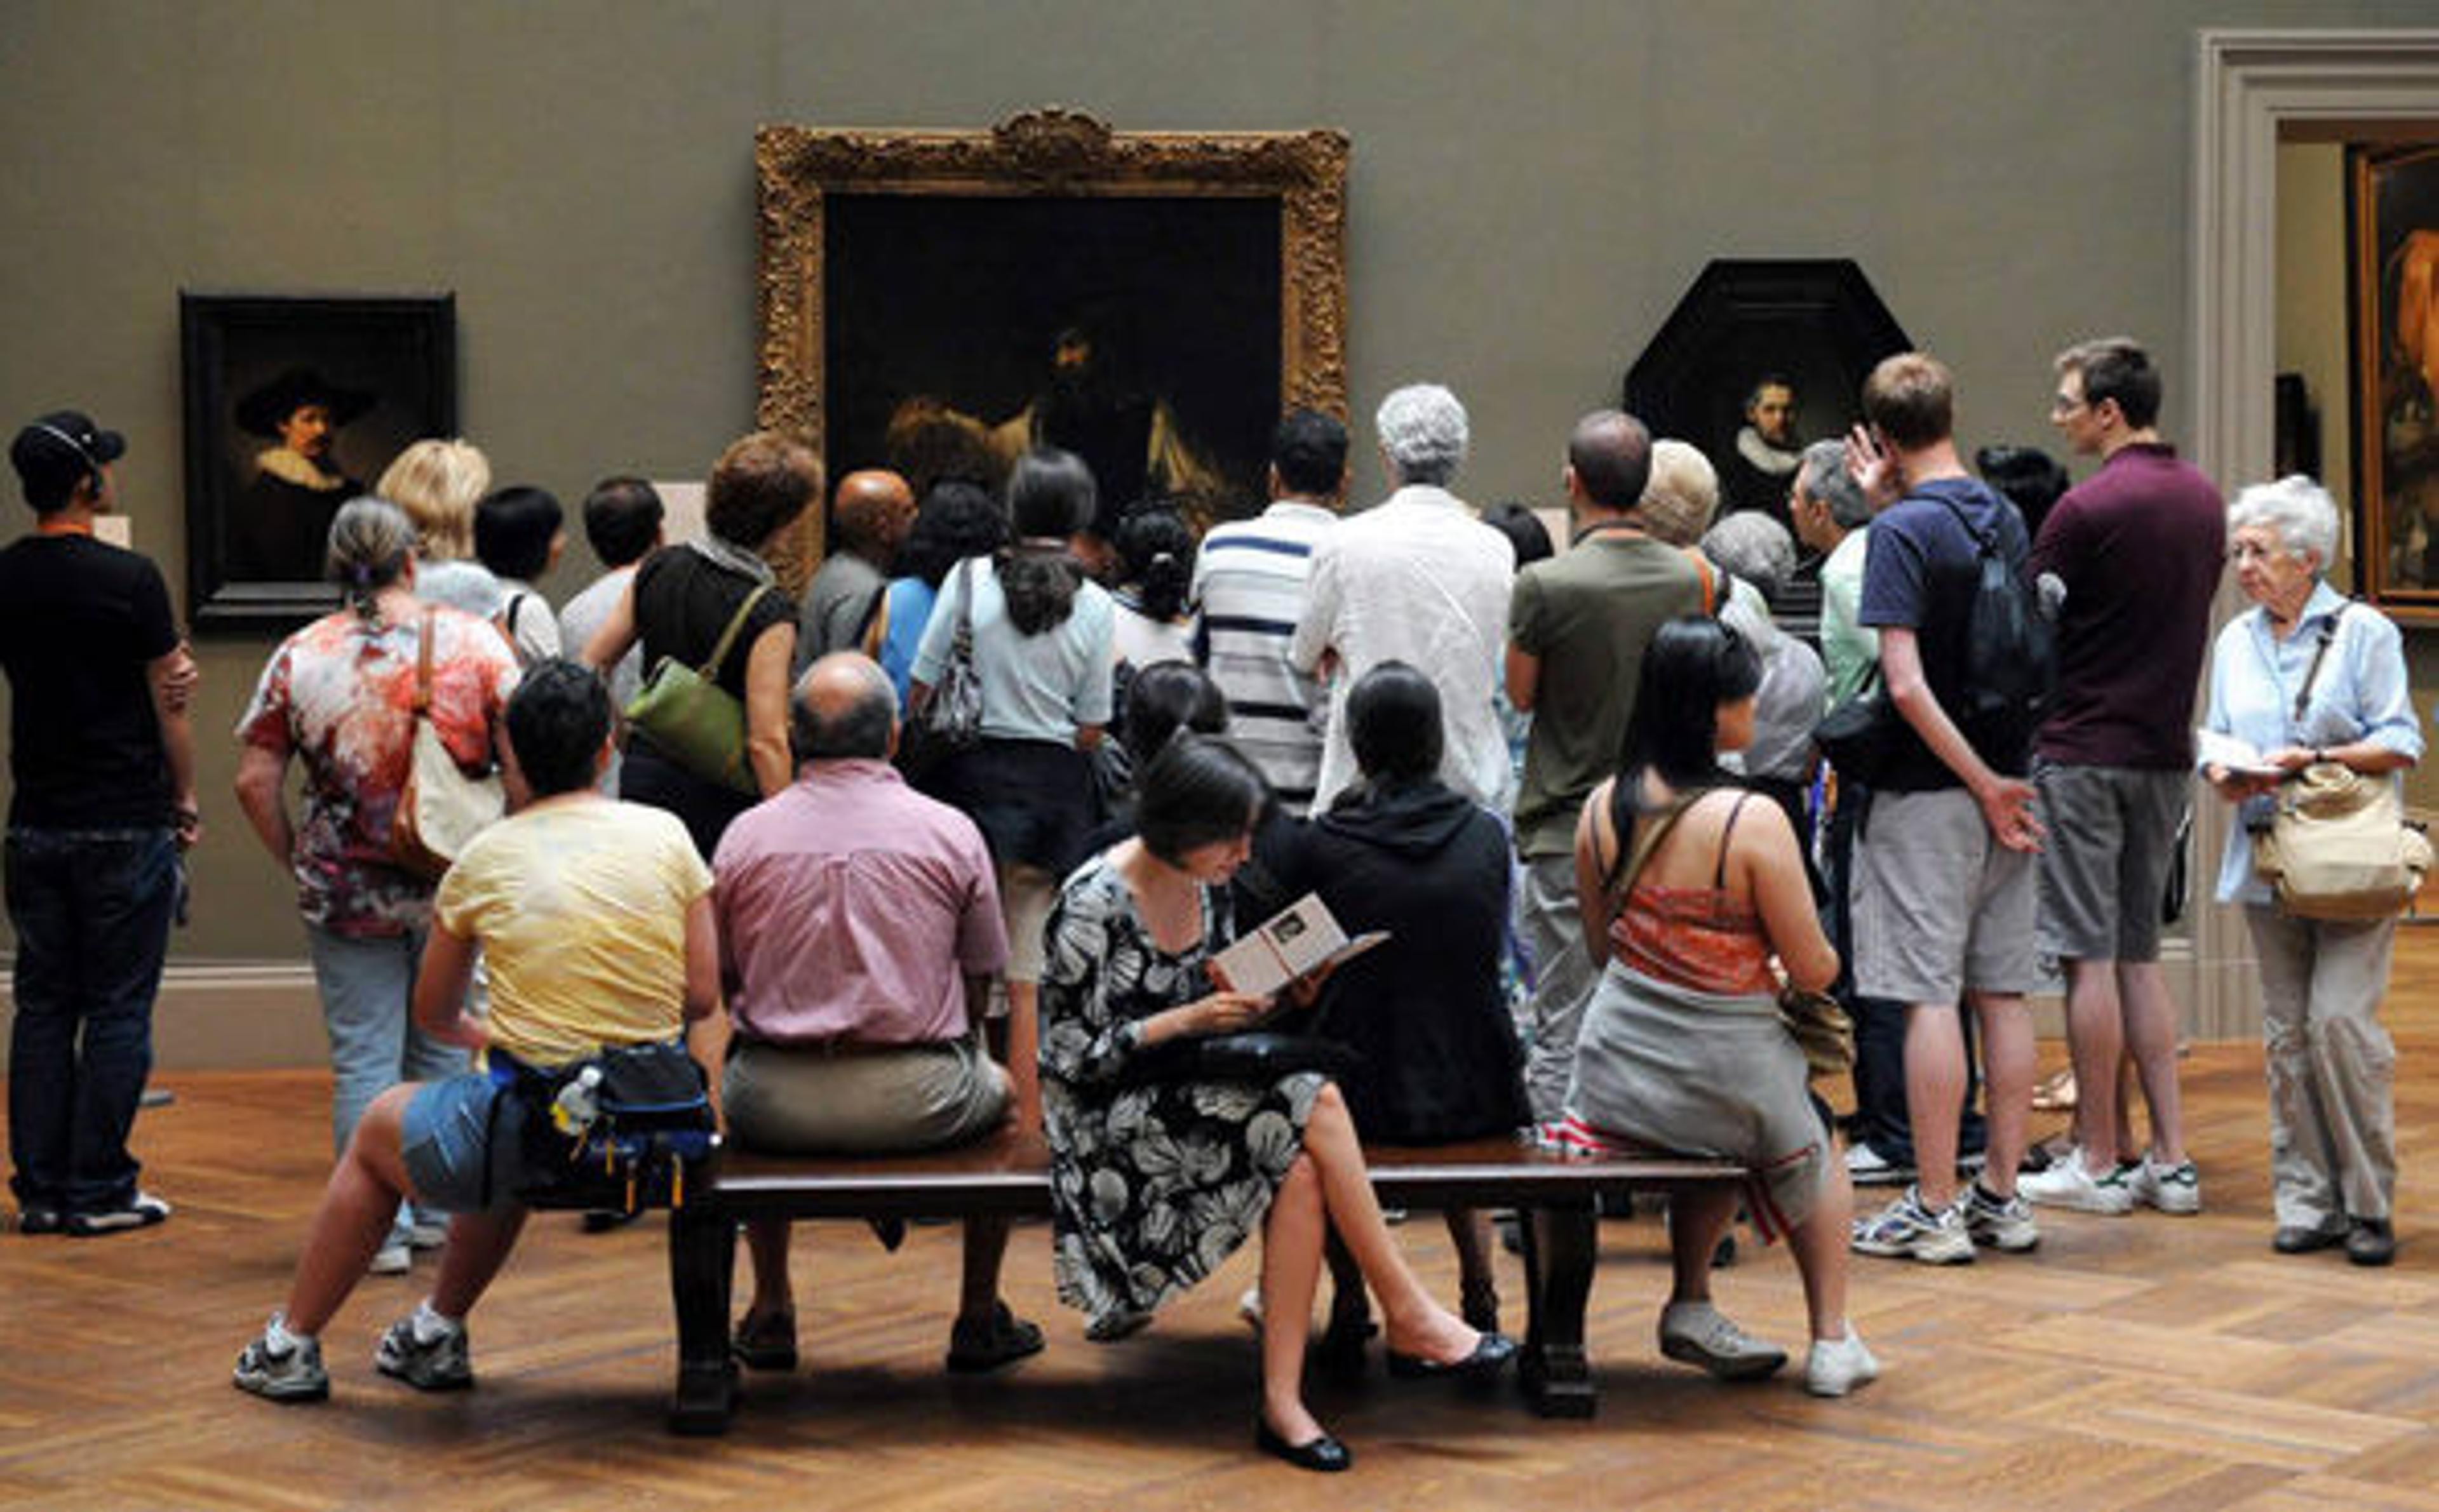 Visitors in the galleries